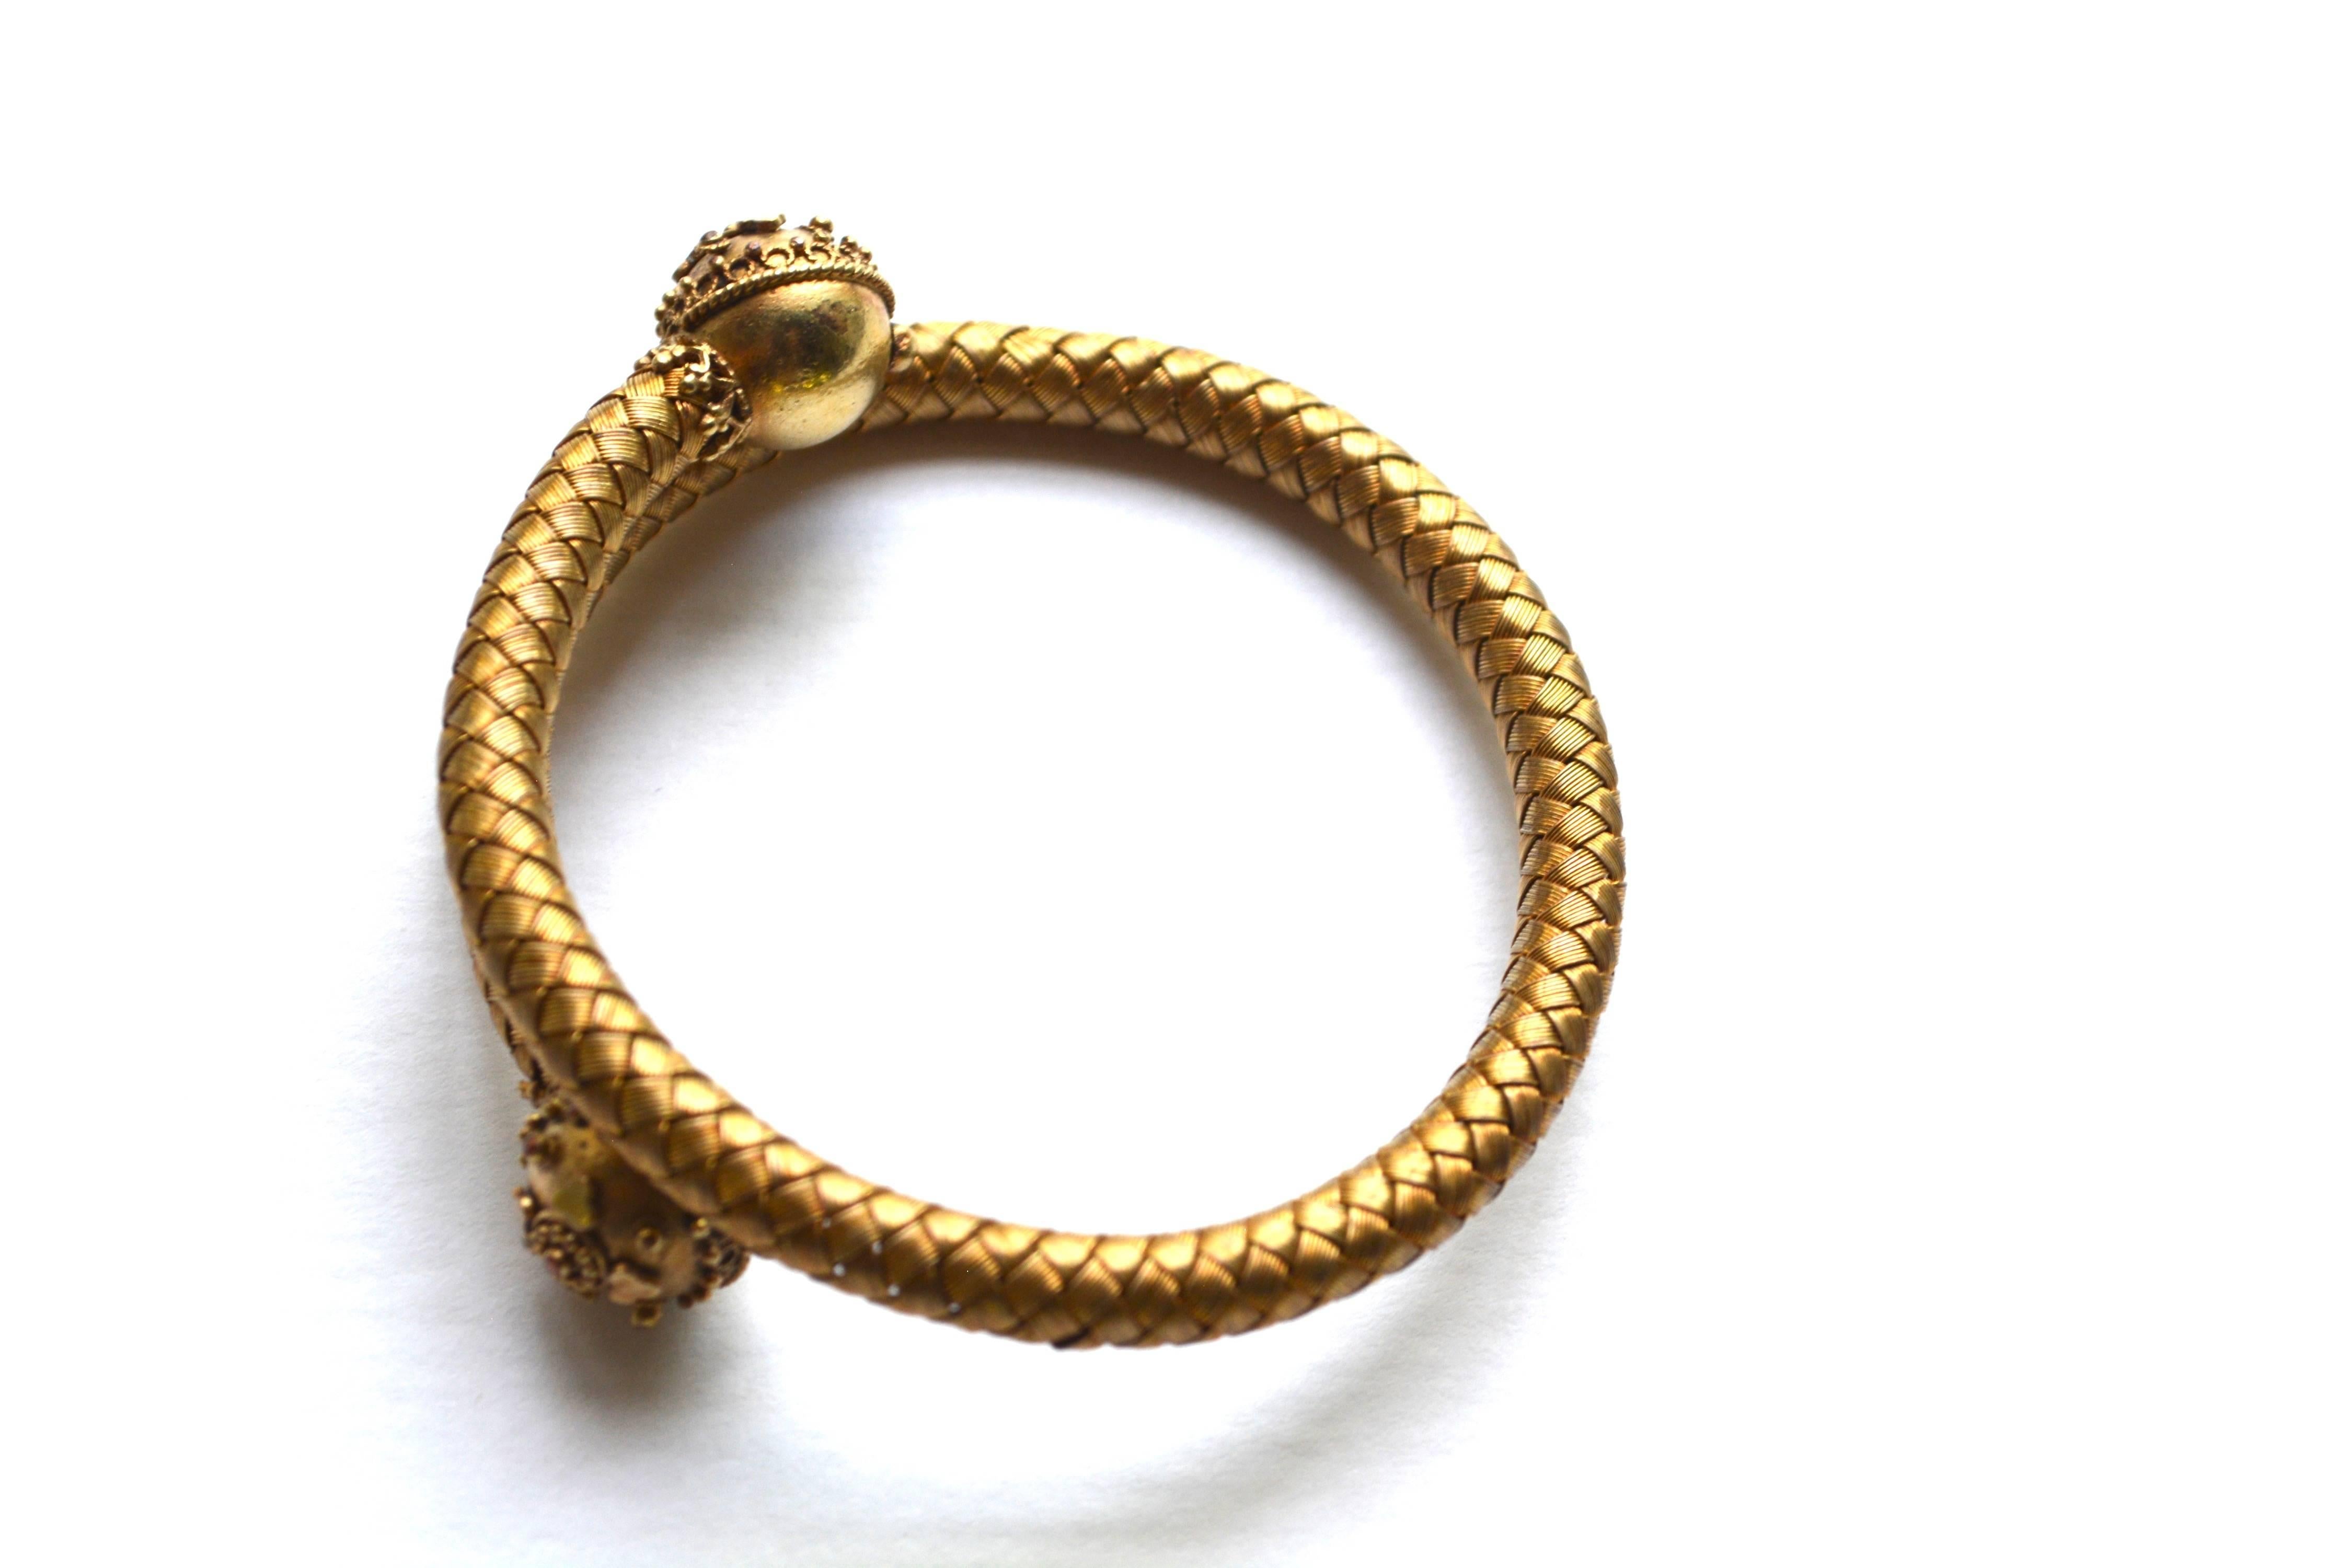 Lovely woven 1800s wrap bracelet made of 14k gold. Condition is excellent. Will adjust from about a 6.5